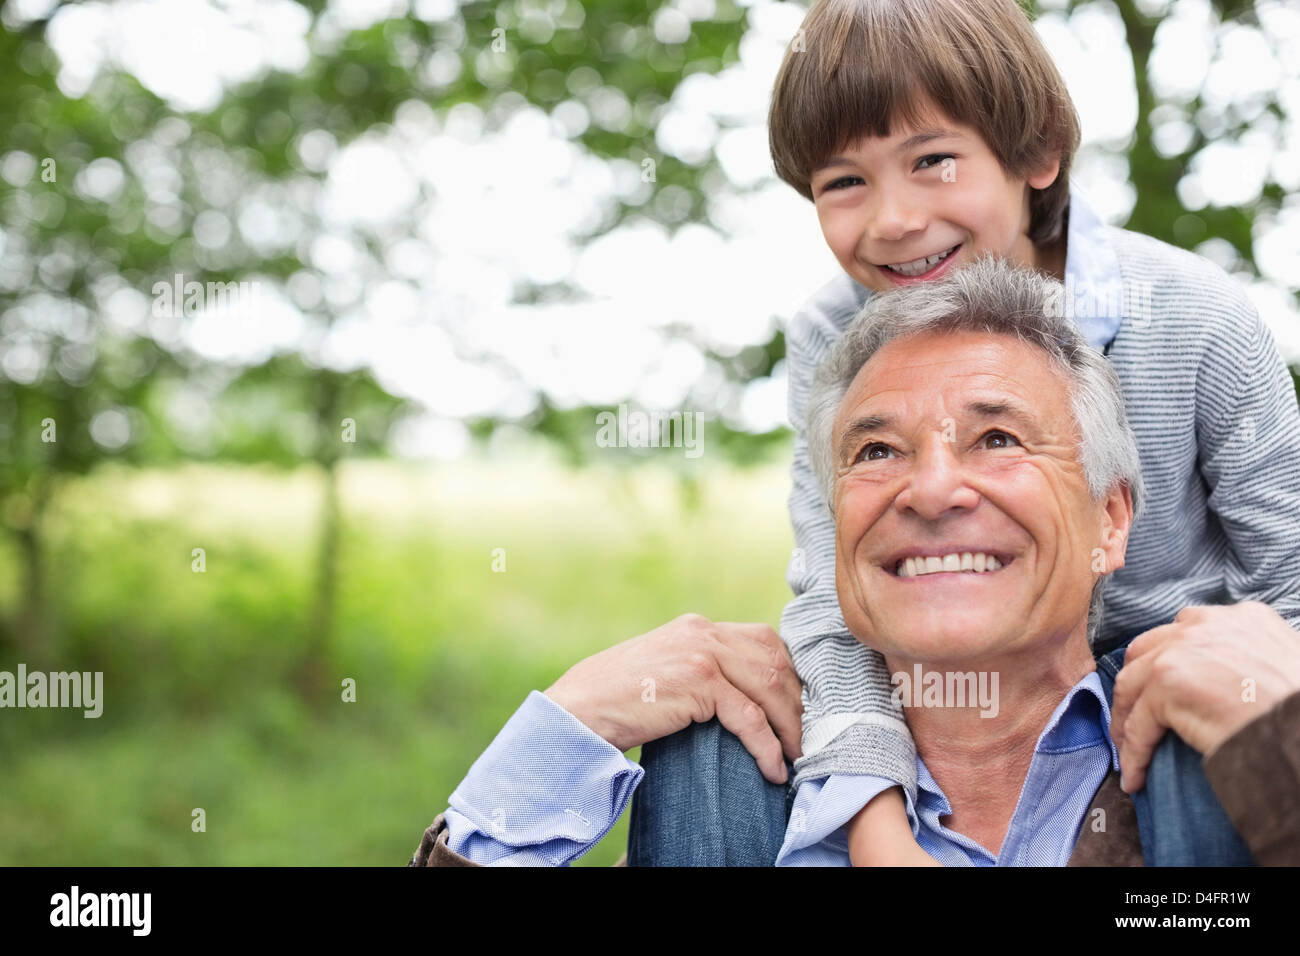 Man carrying grandson on his shoulders Stock Photo